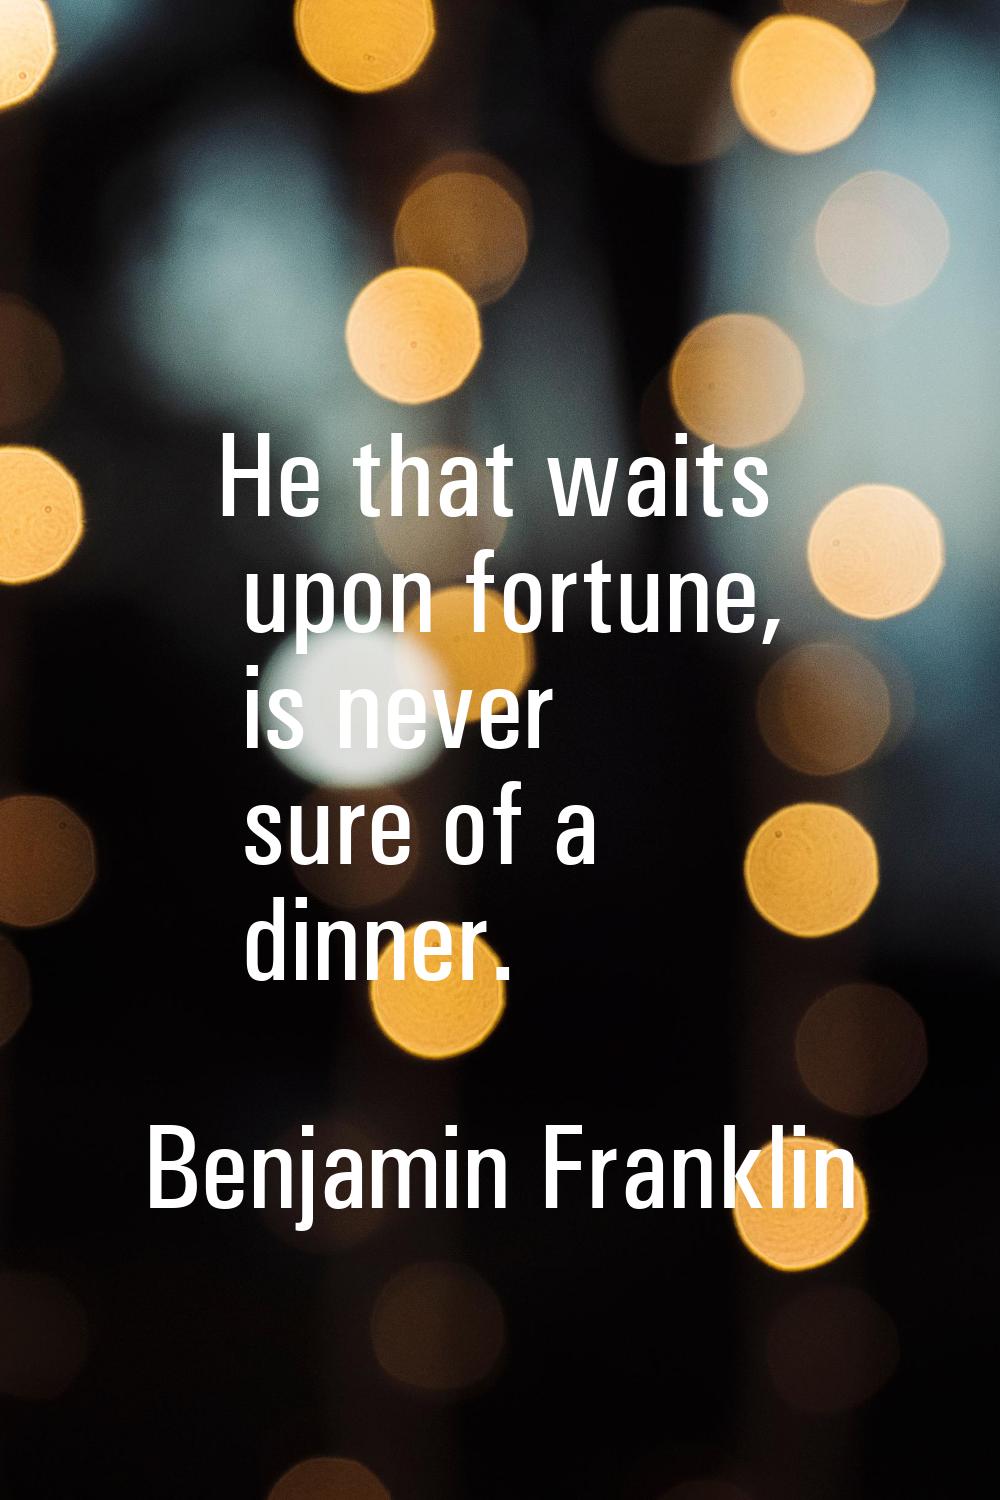 He that waits upon fortune, is never sure of a dinner.